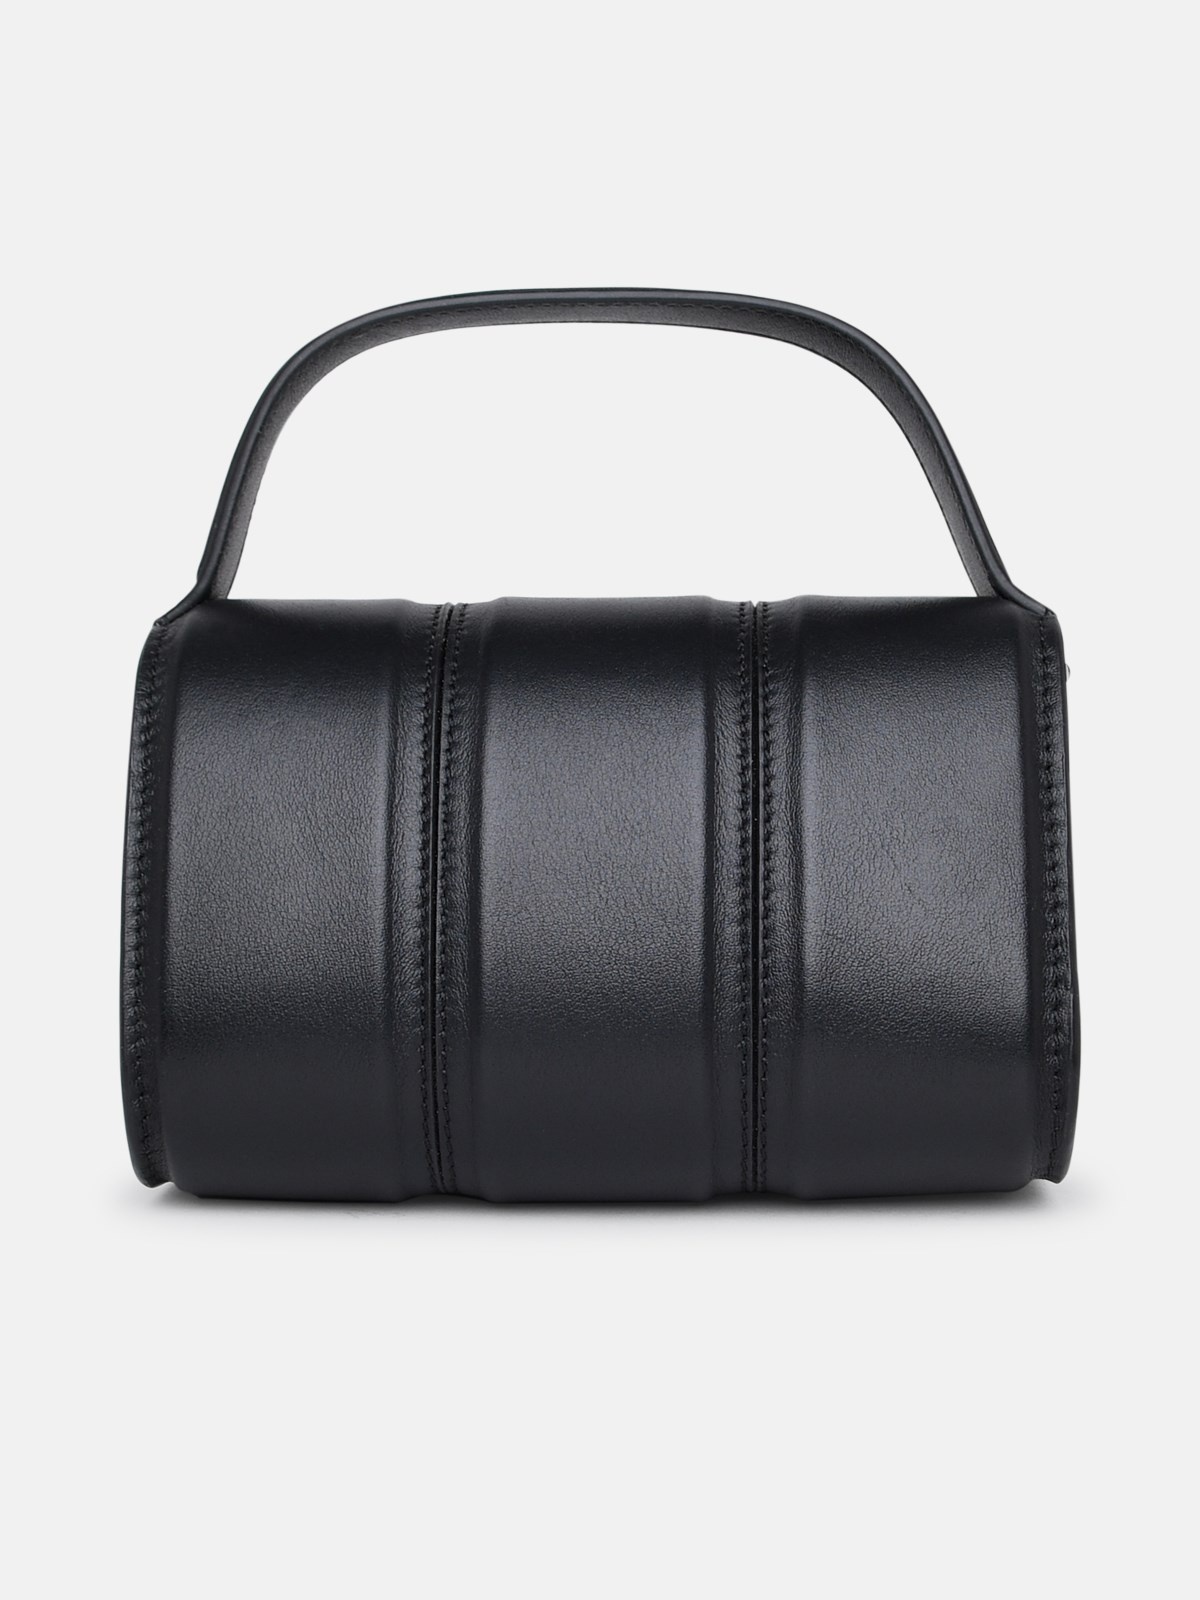 Three bag in black leather - 3